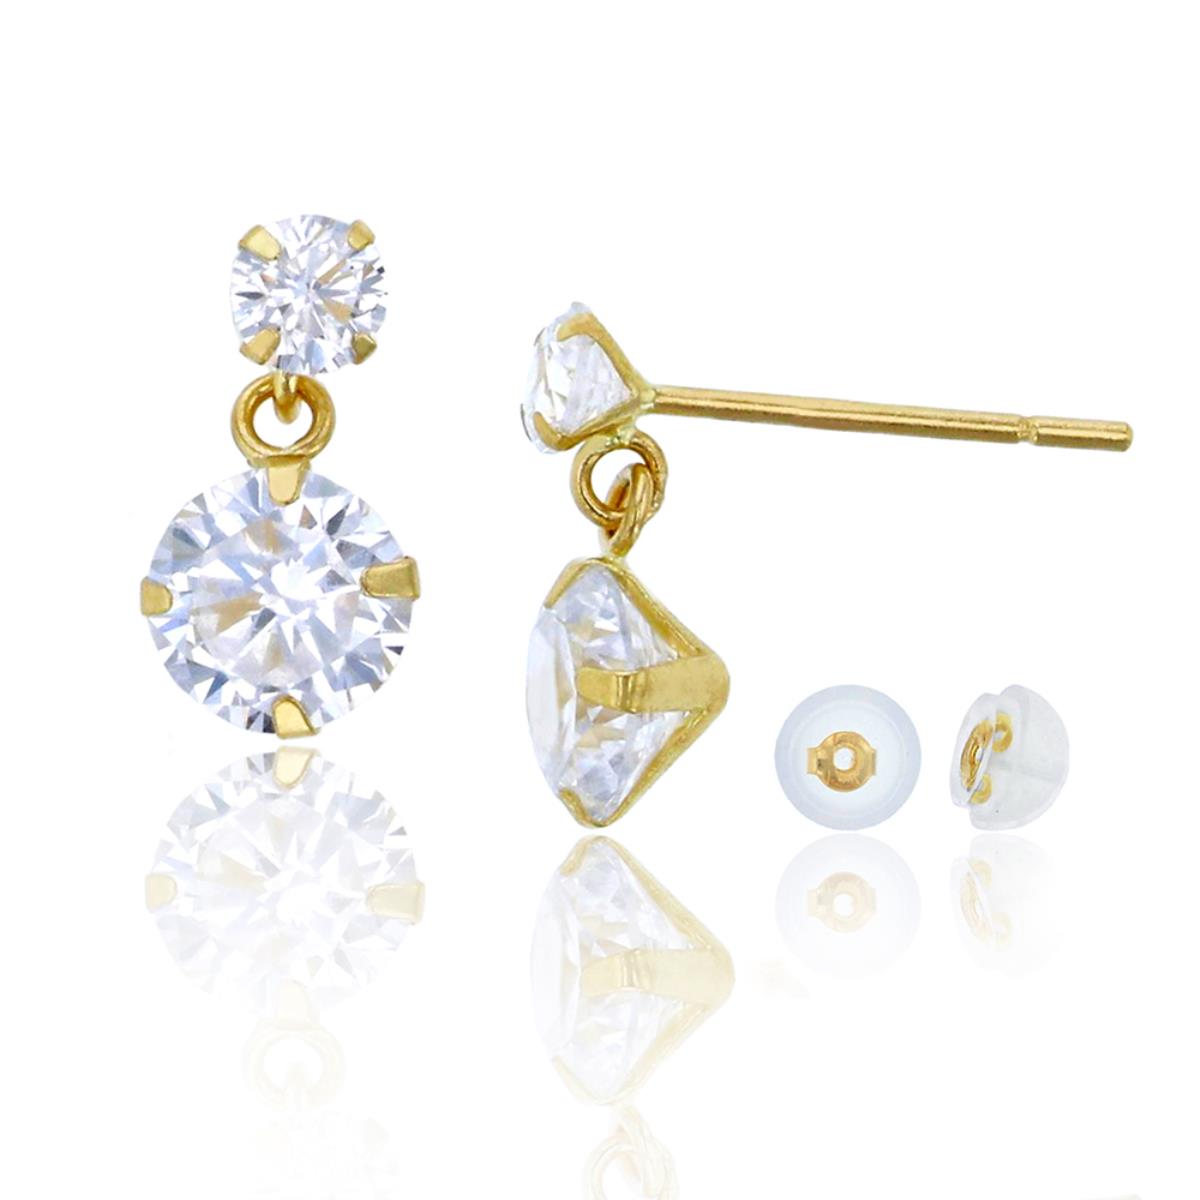 10K Yellow Gold 3mm, 5mm Dangling Martini Stud Earring & 10K Silicone Back